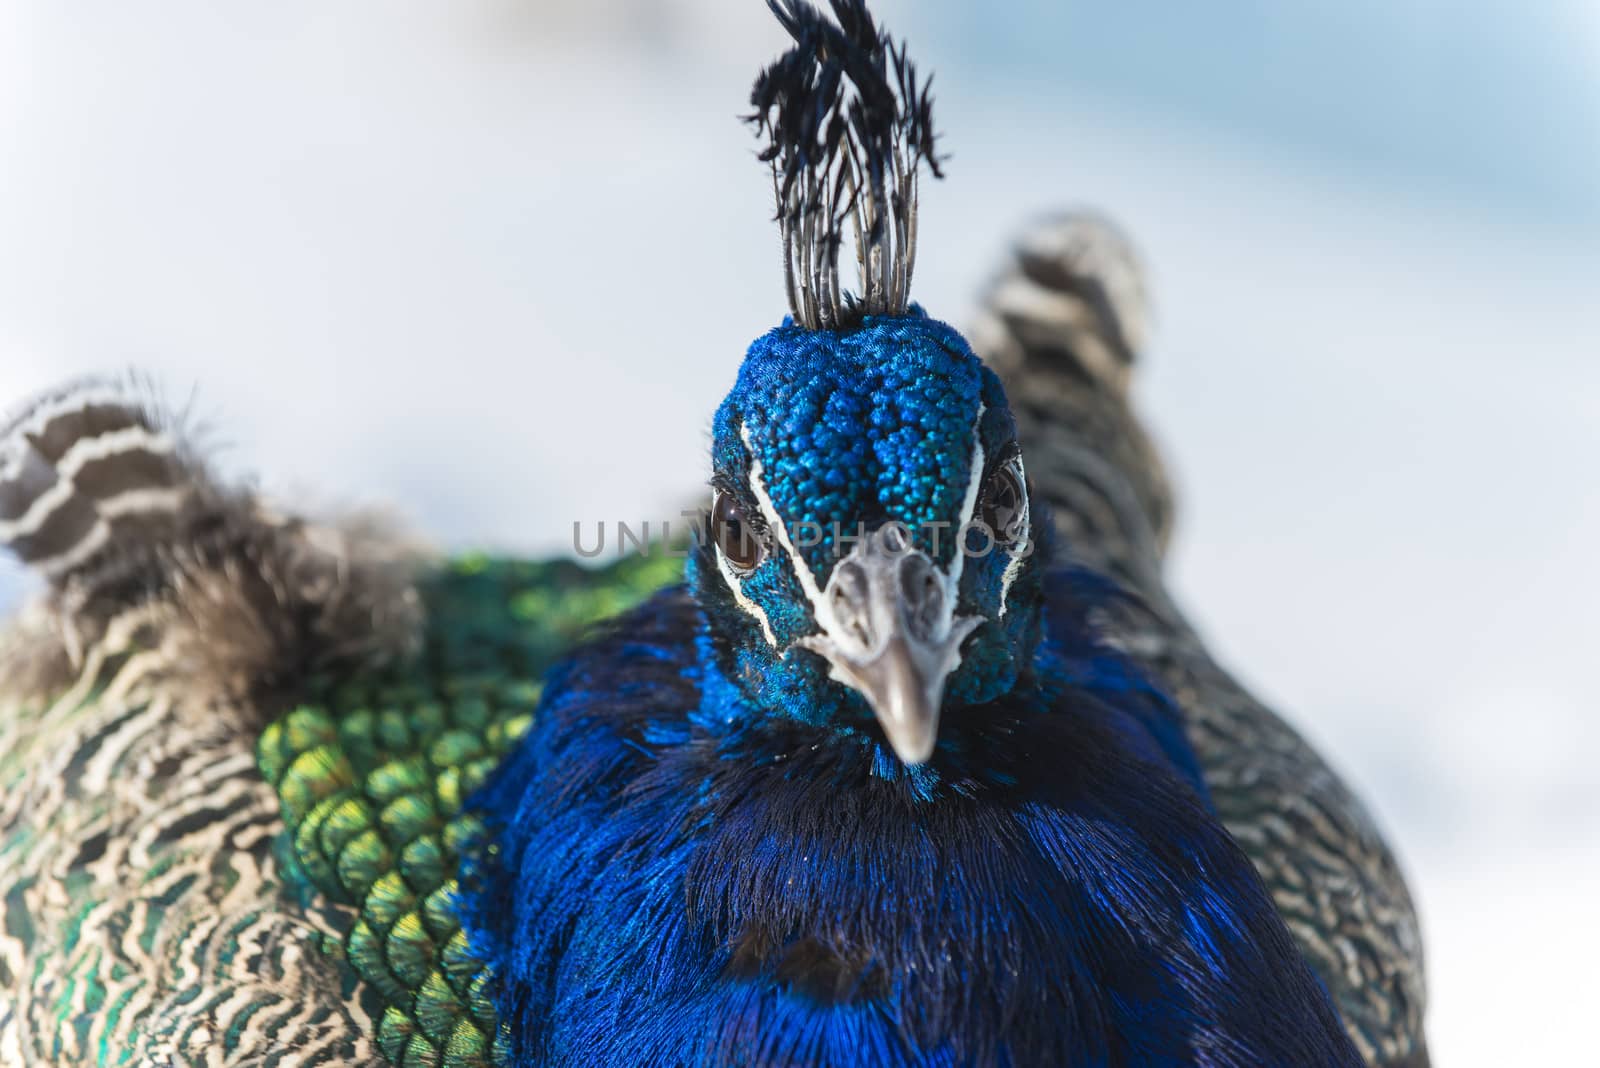 Close-up shot of a peacock looking into the camera